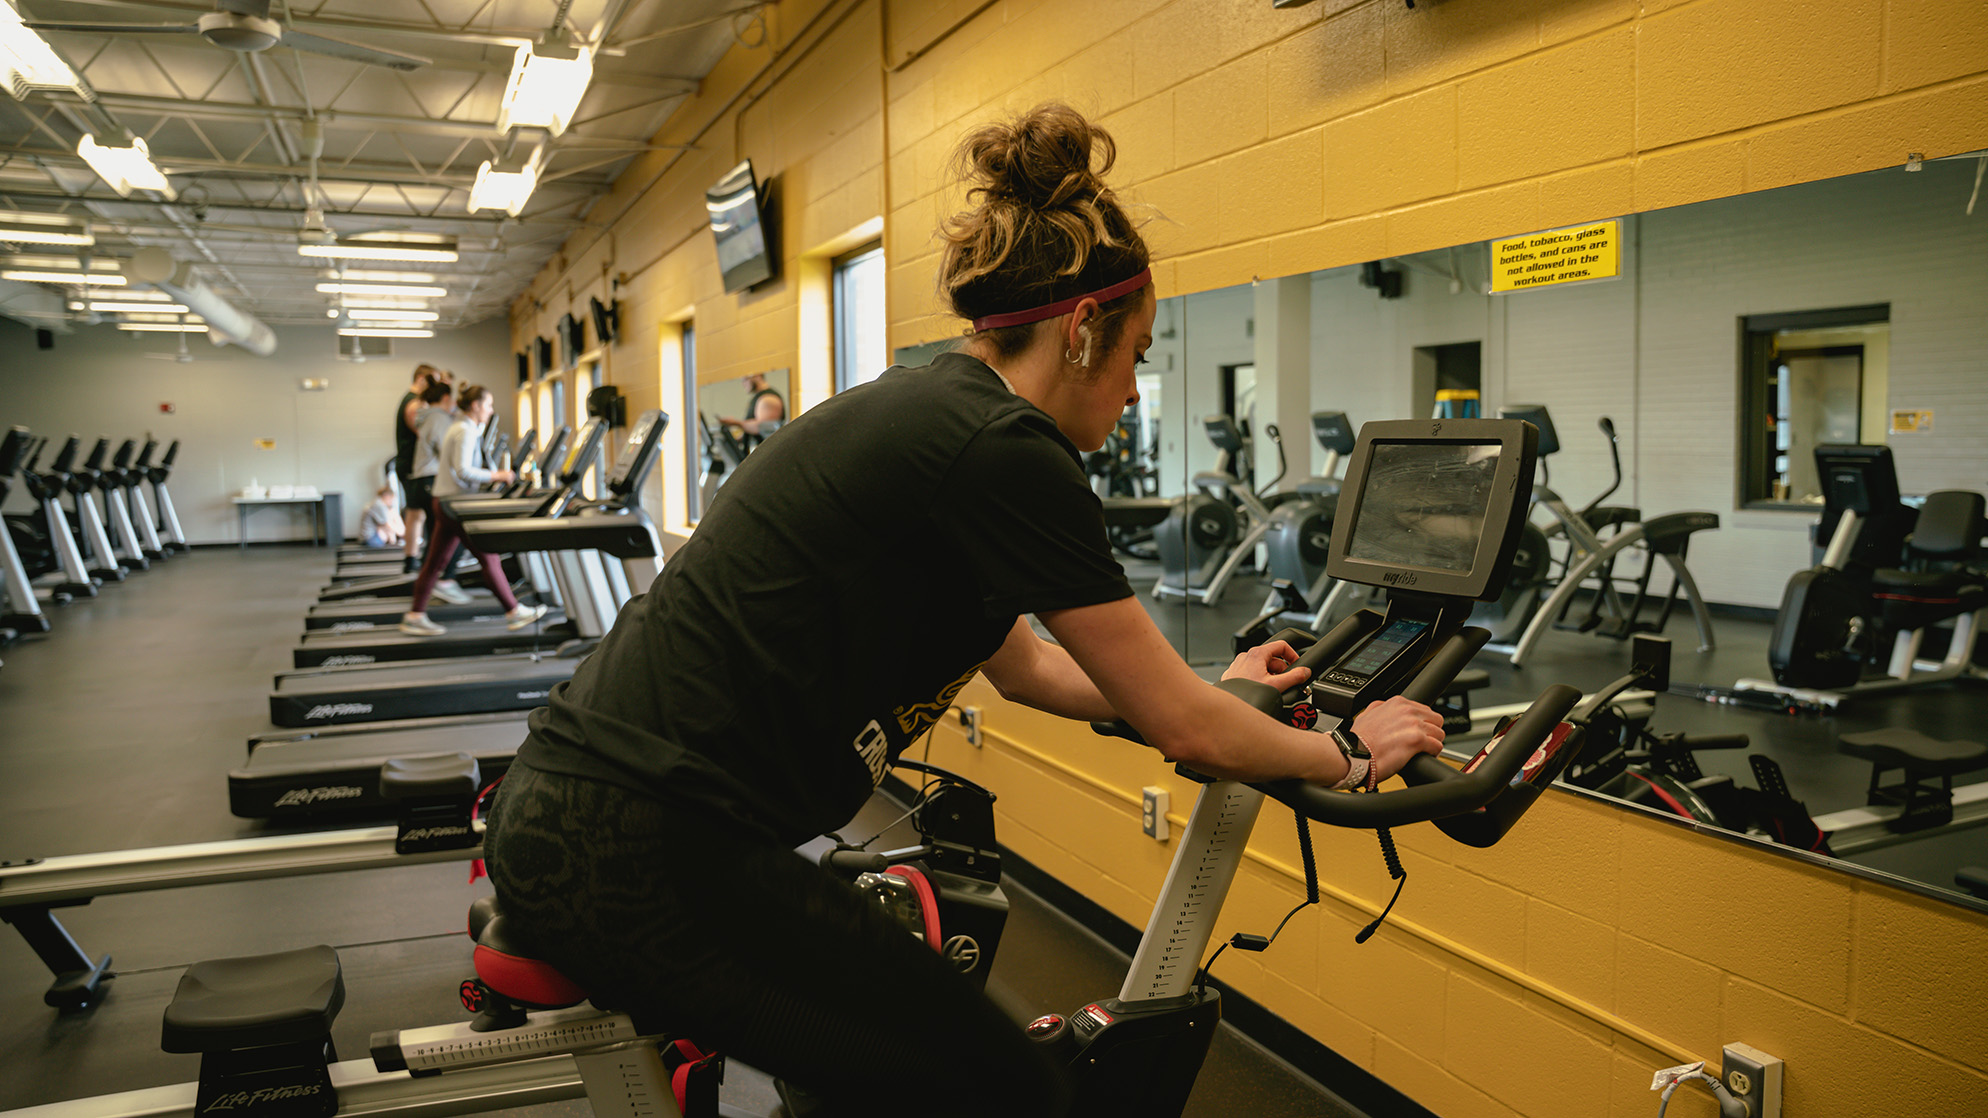 Student working out at Baker fitness center